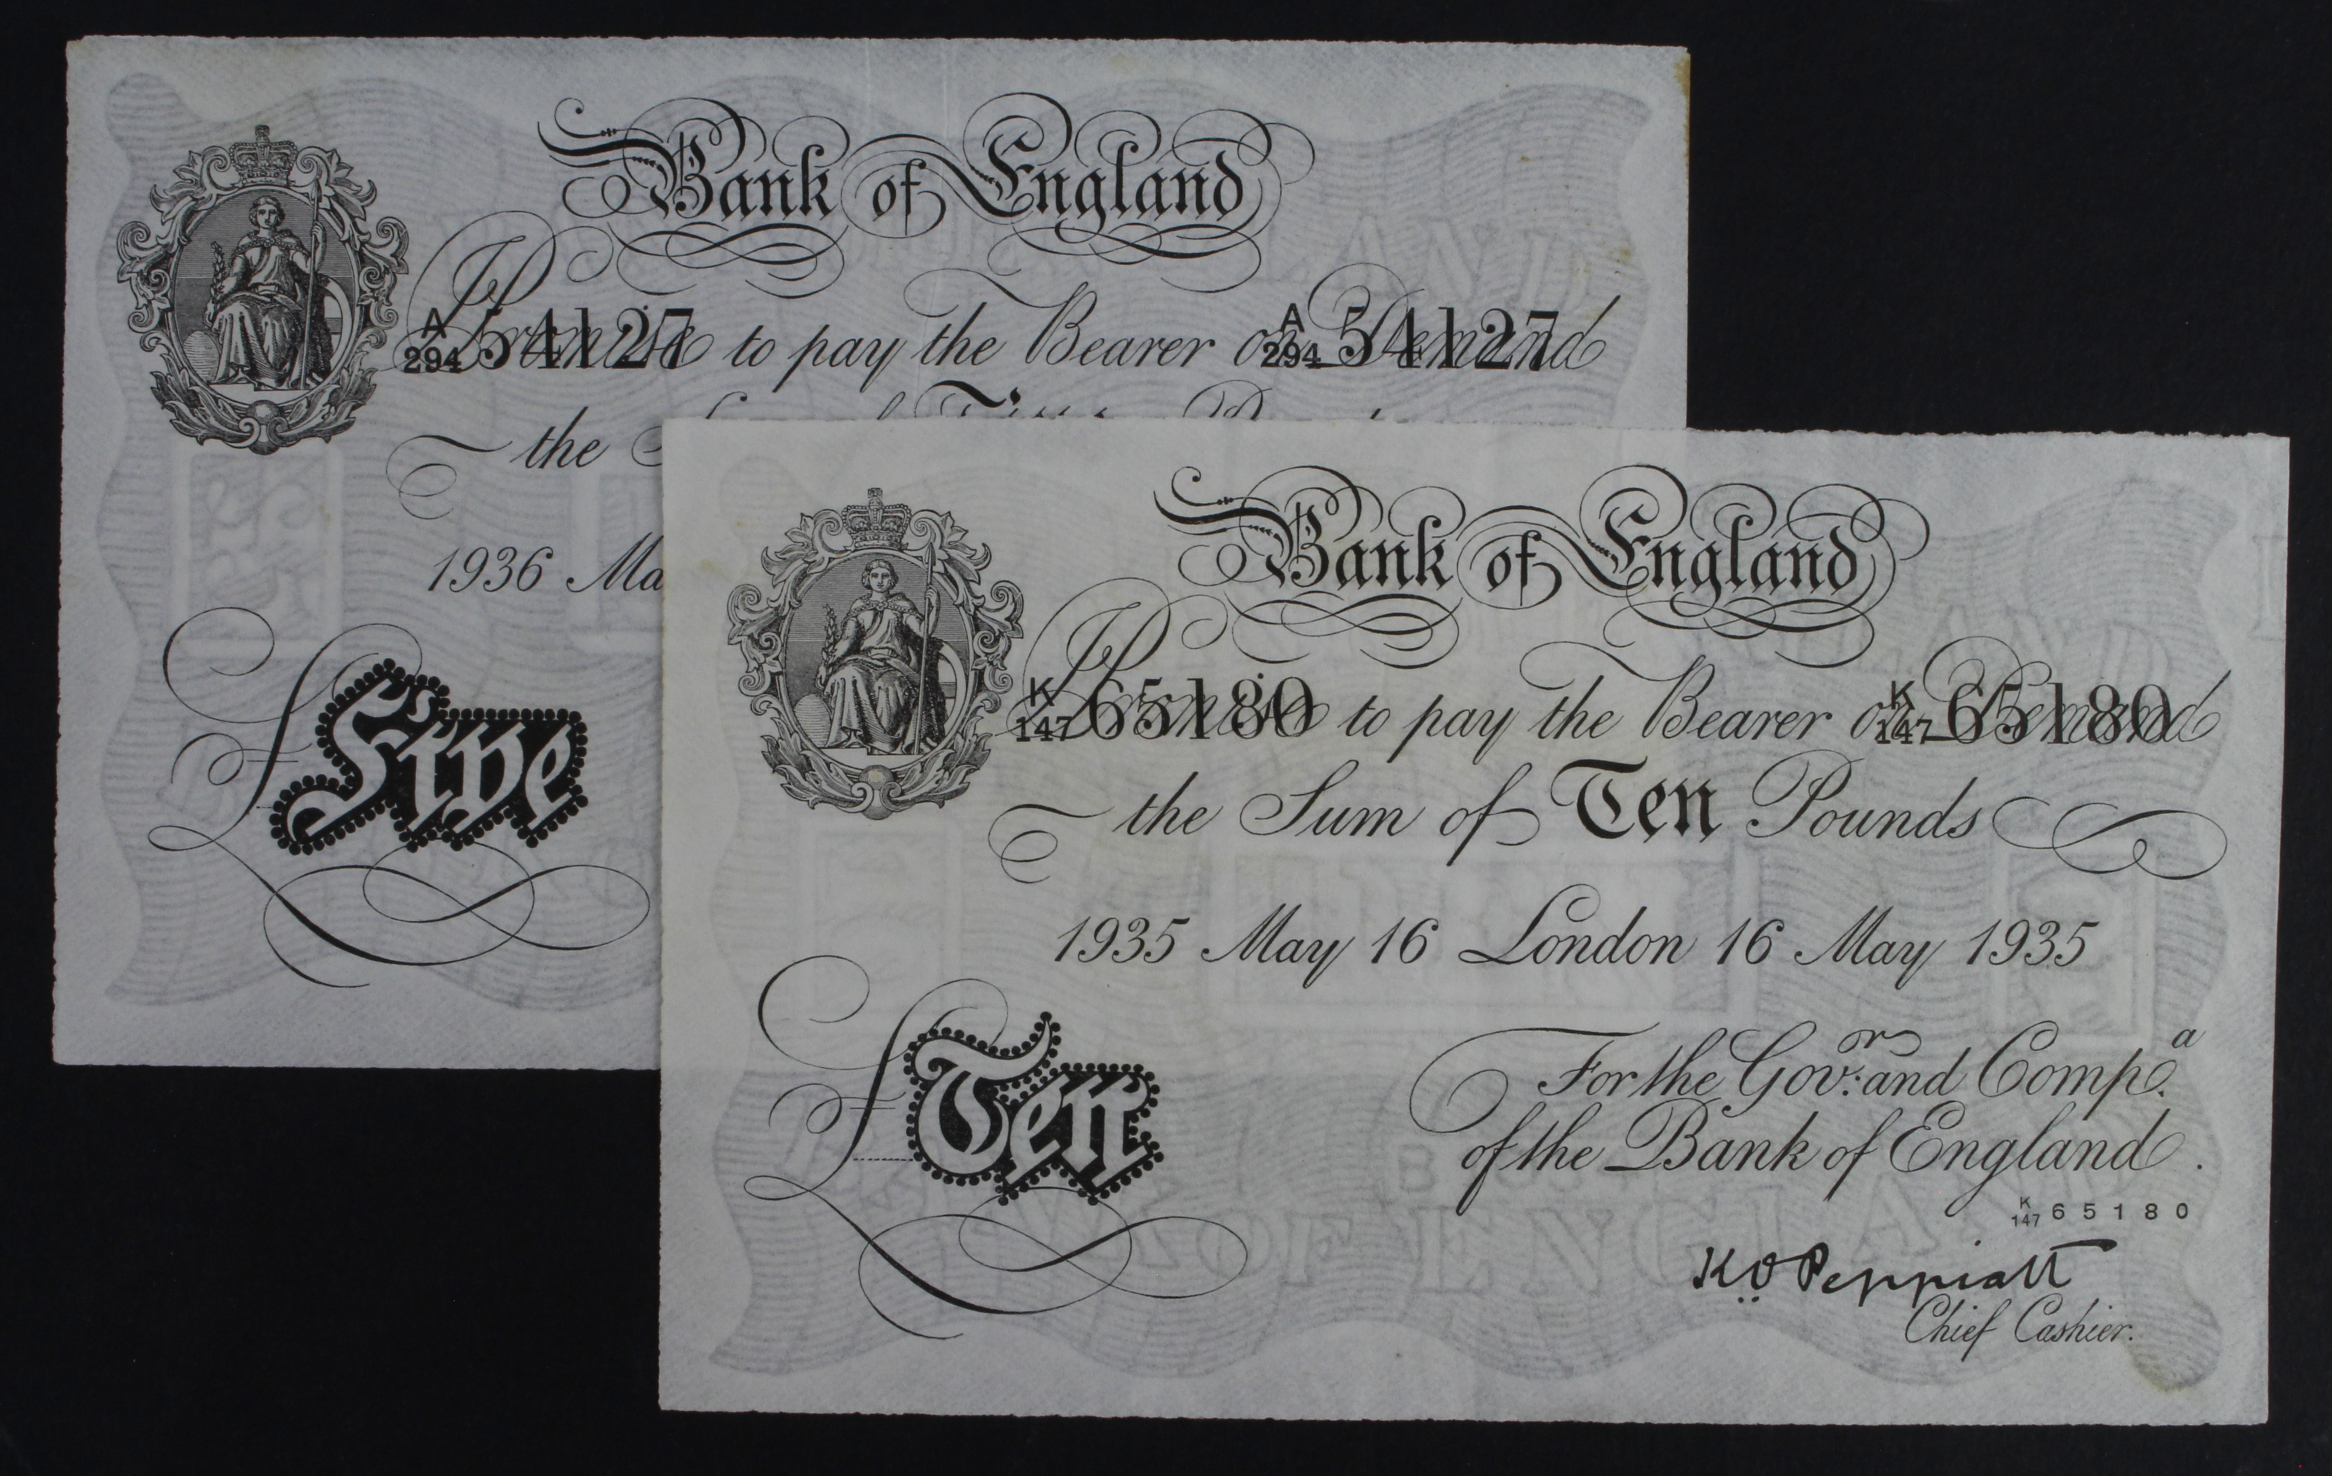 Peppiatt BERNHARD notes (2), 10 Pounds dated 16th May 1935 serial K/147 65180, VF+, 5 Pounds dated